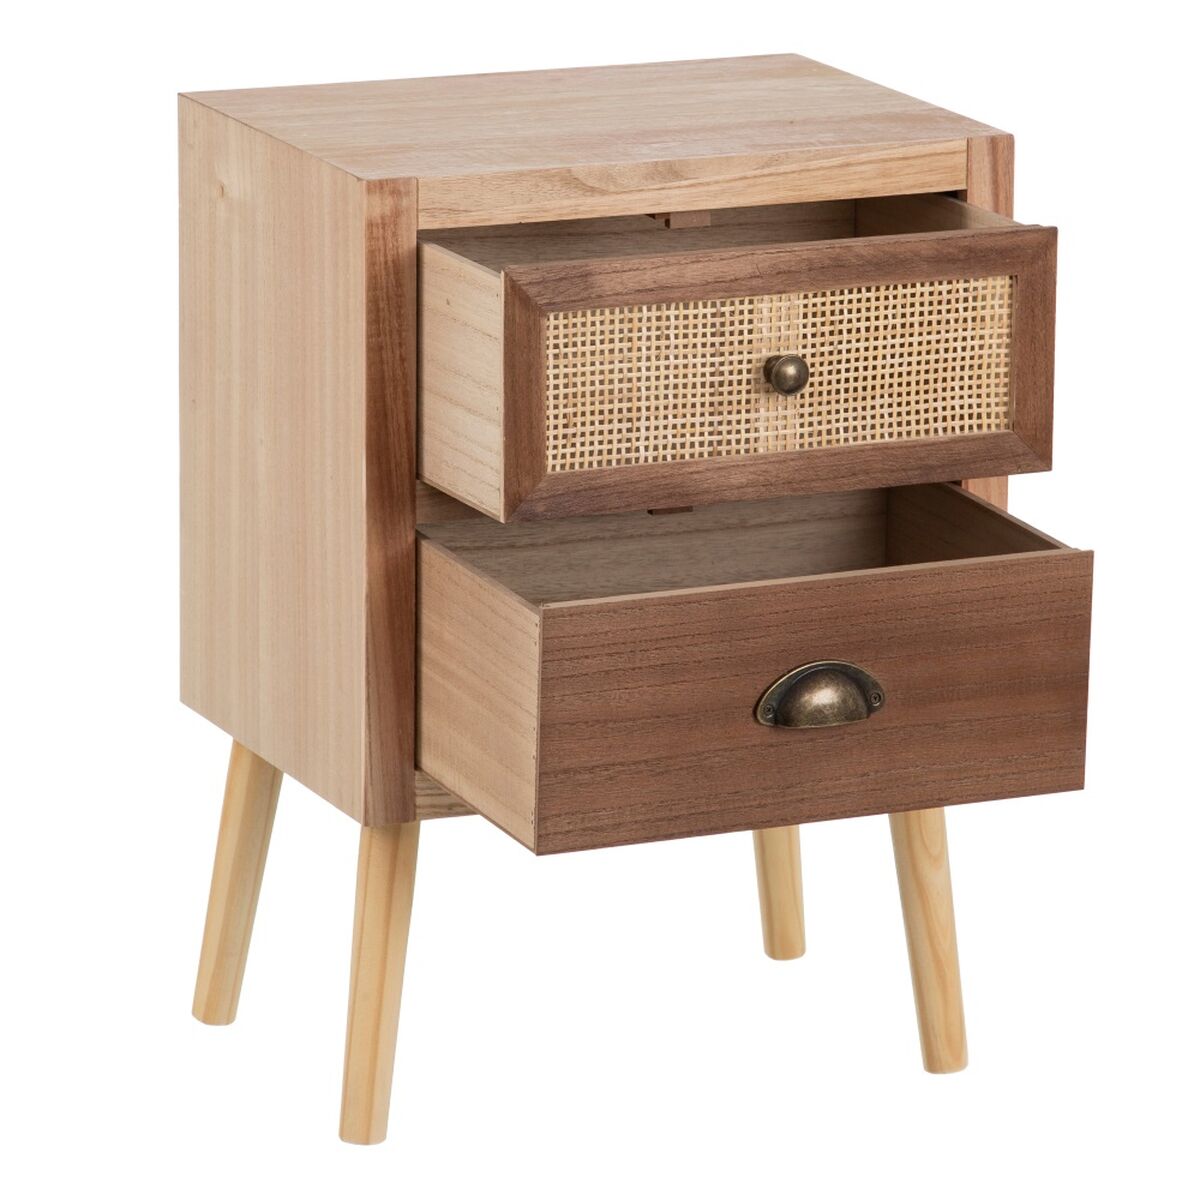 Natural Bedside Table in Wood and Rattan (40 x 30 x 57 cm)